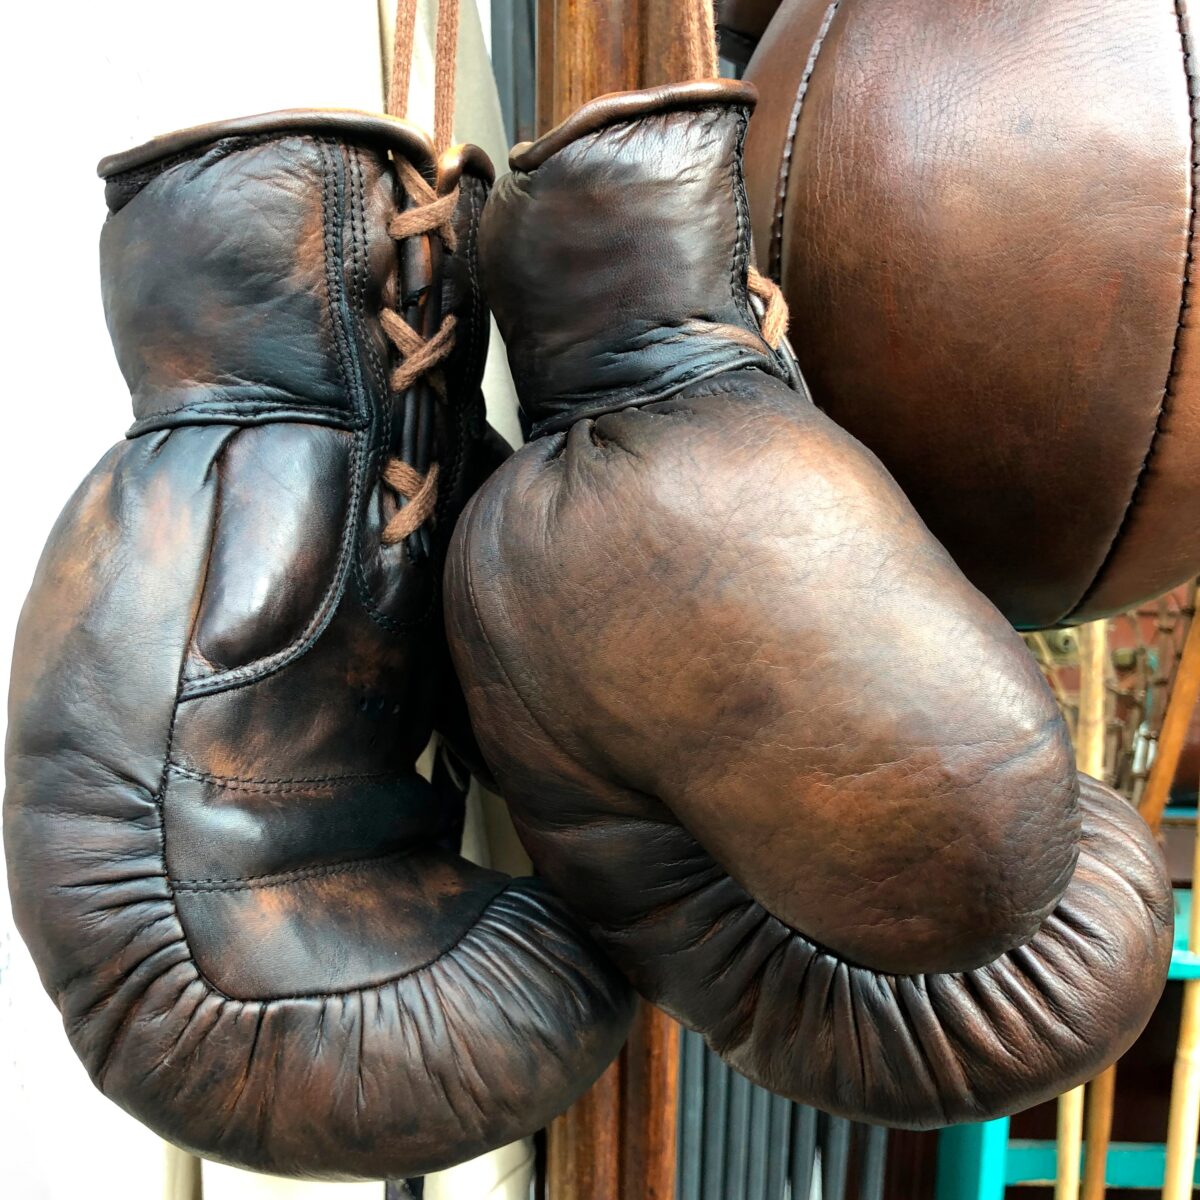 seo for boxing training